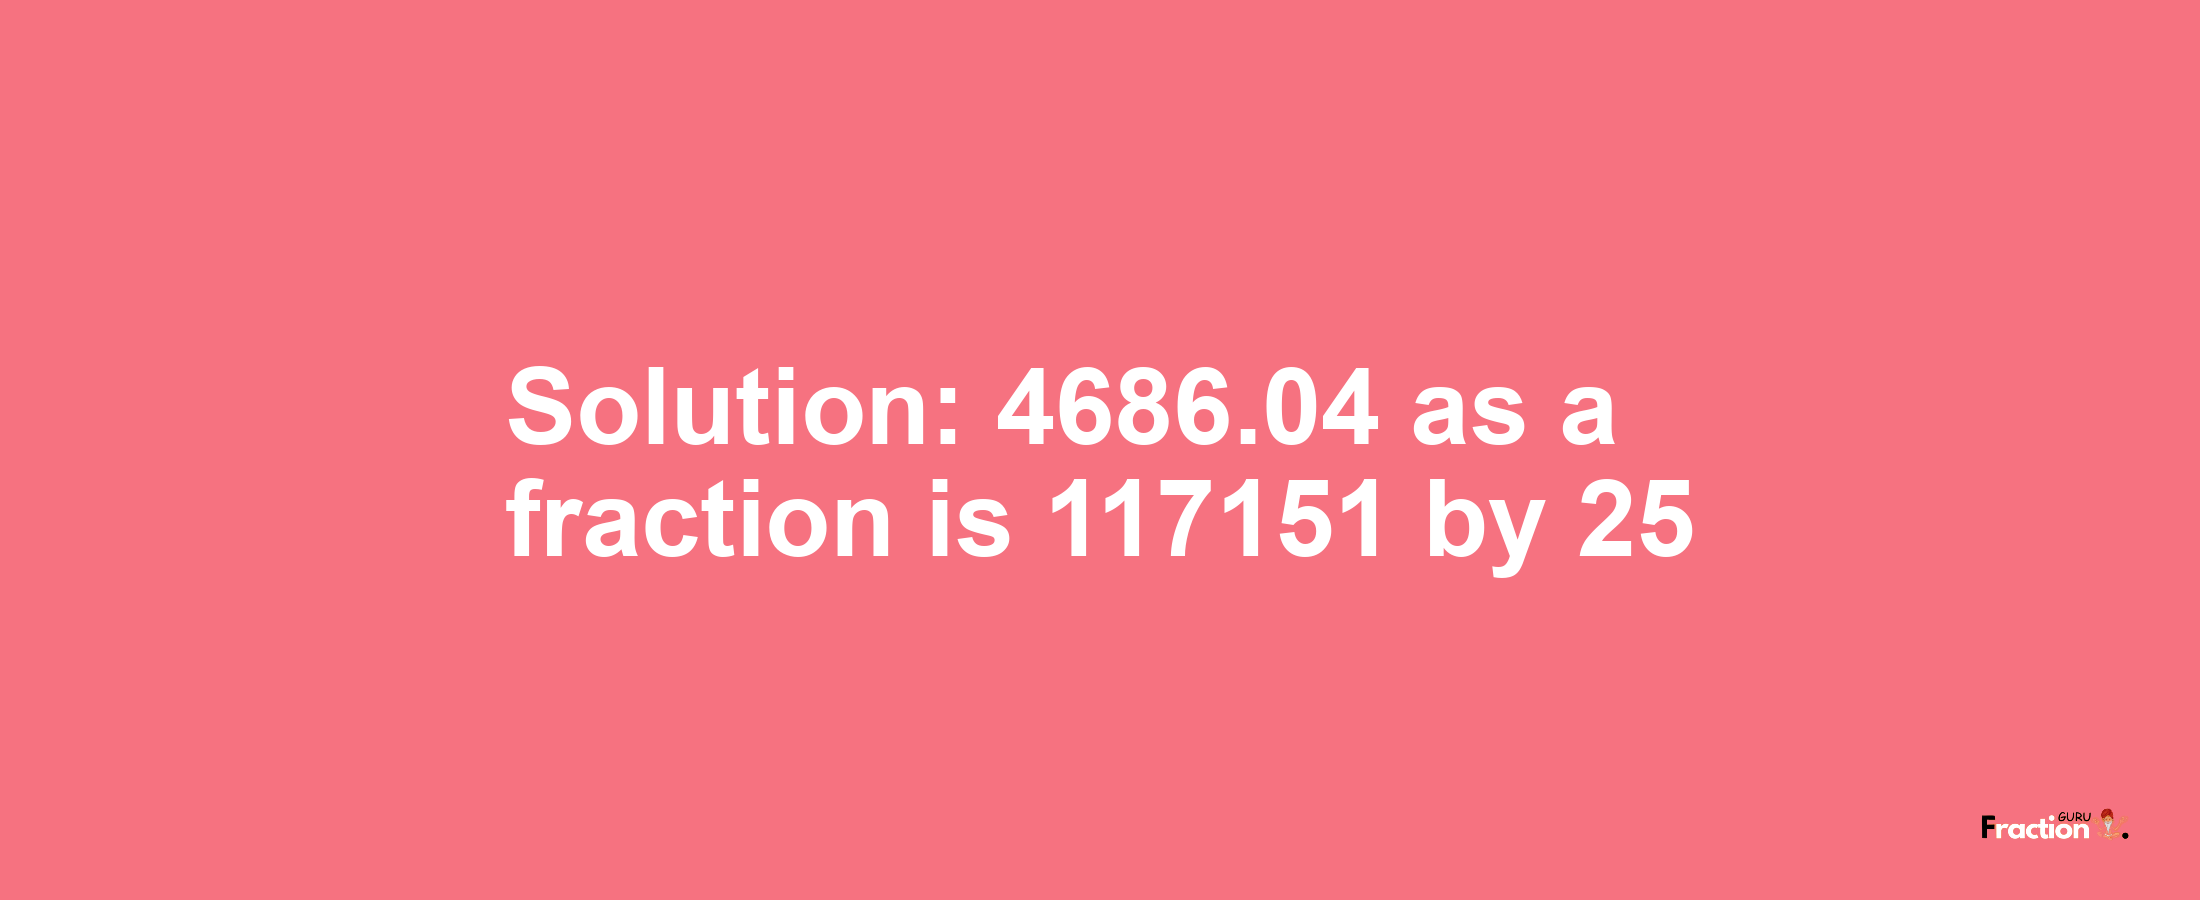 Solution:4686.04 as a fraction is 117151/25